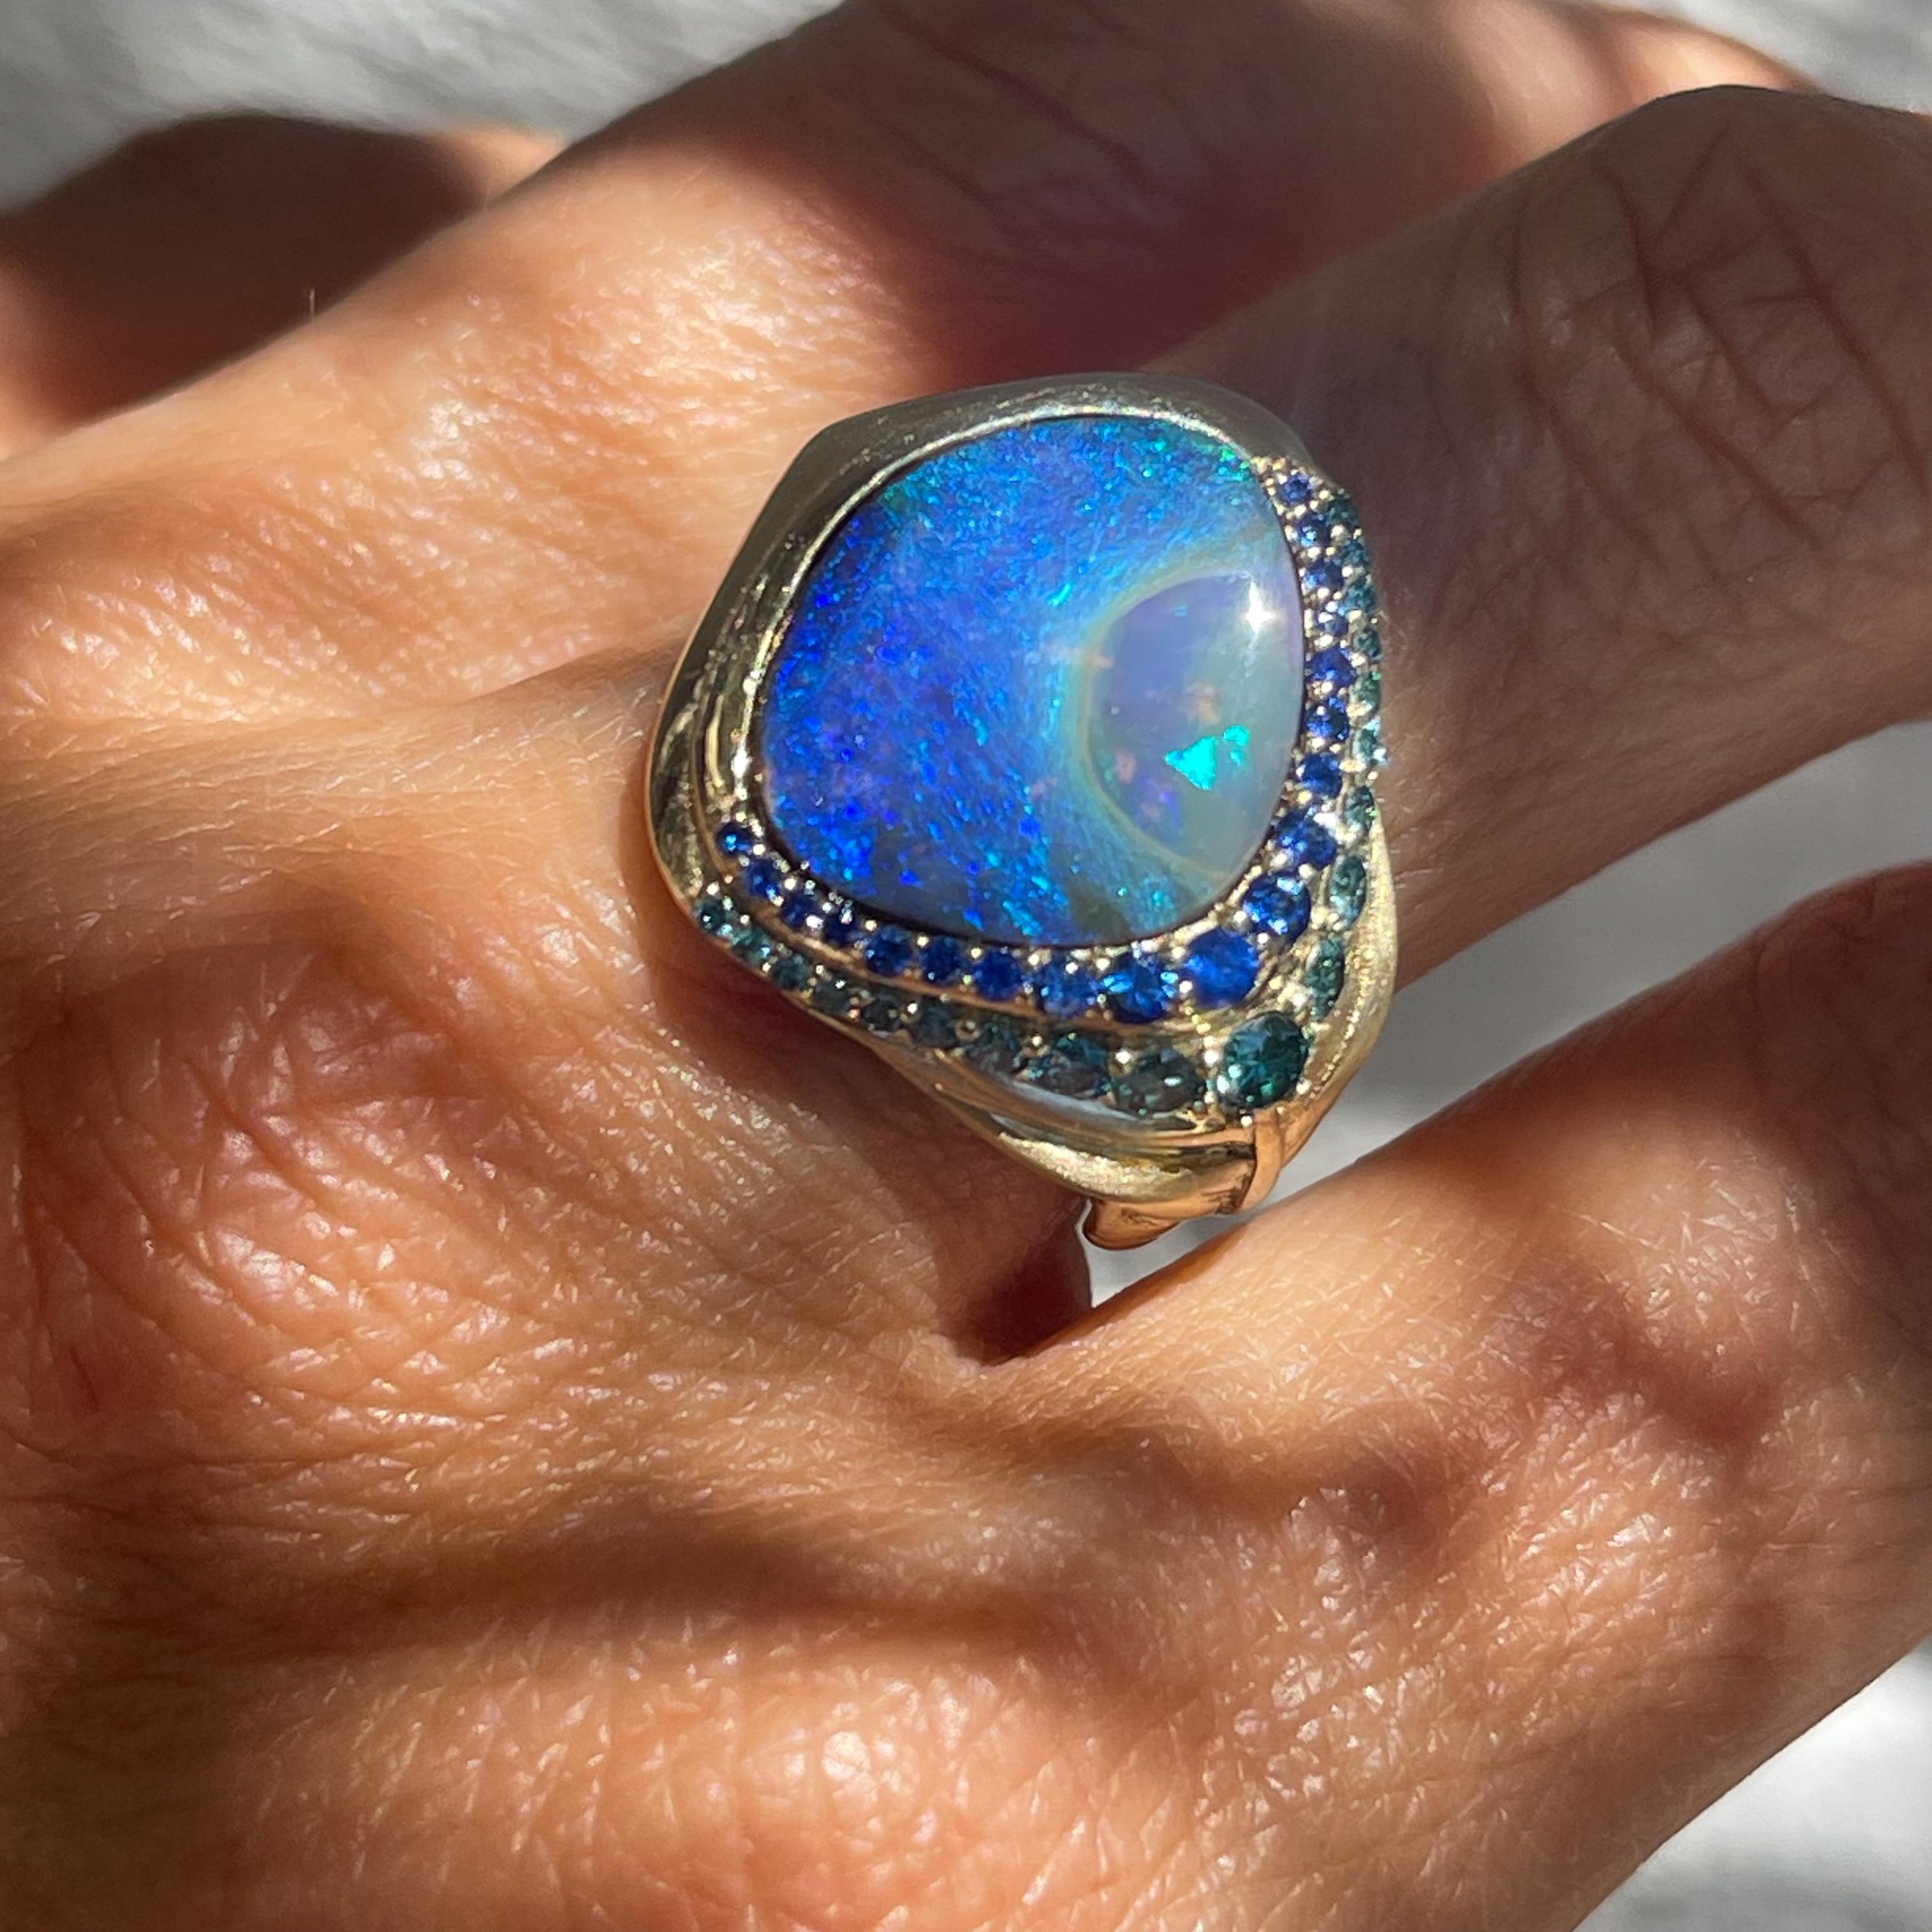 Plume Australian Opal Ring in Gold with Sapphires and Diamonds by NIXIN Jewelry For Sale 1